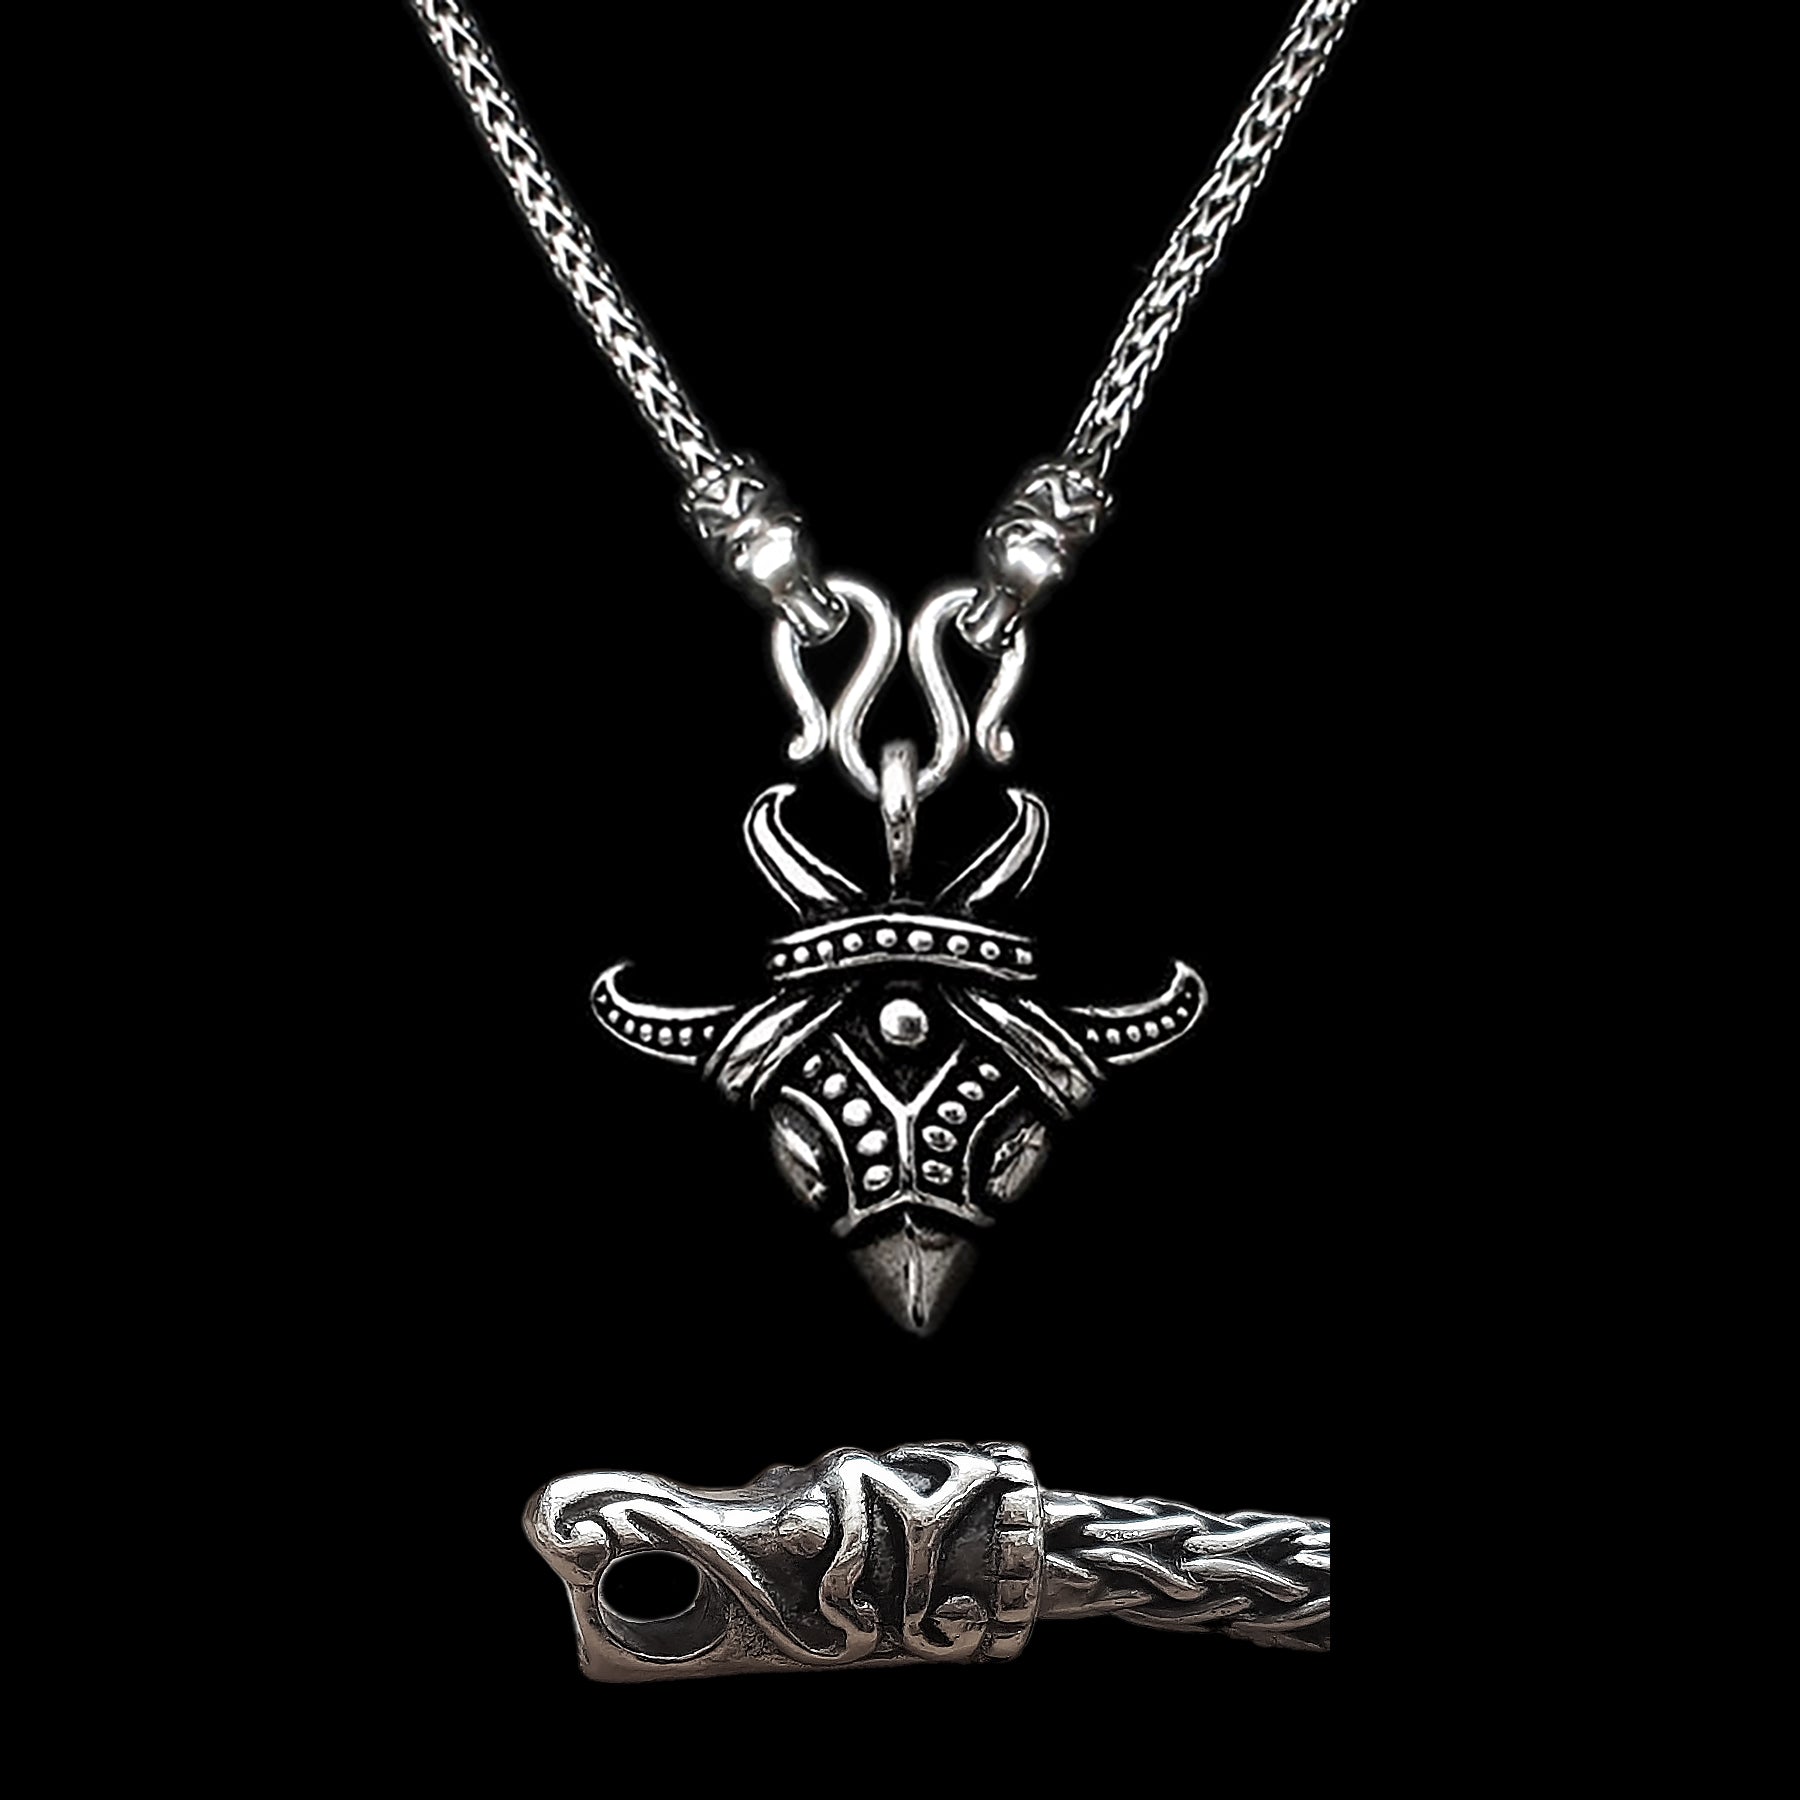 Sterling Silver Viking Snake Chain Necklace with Gotlandic Dragon Heads & Raven Pendant